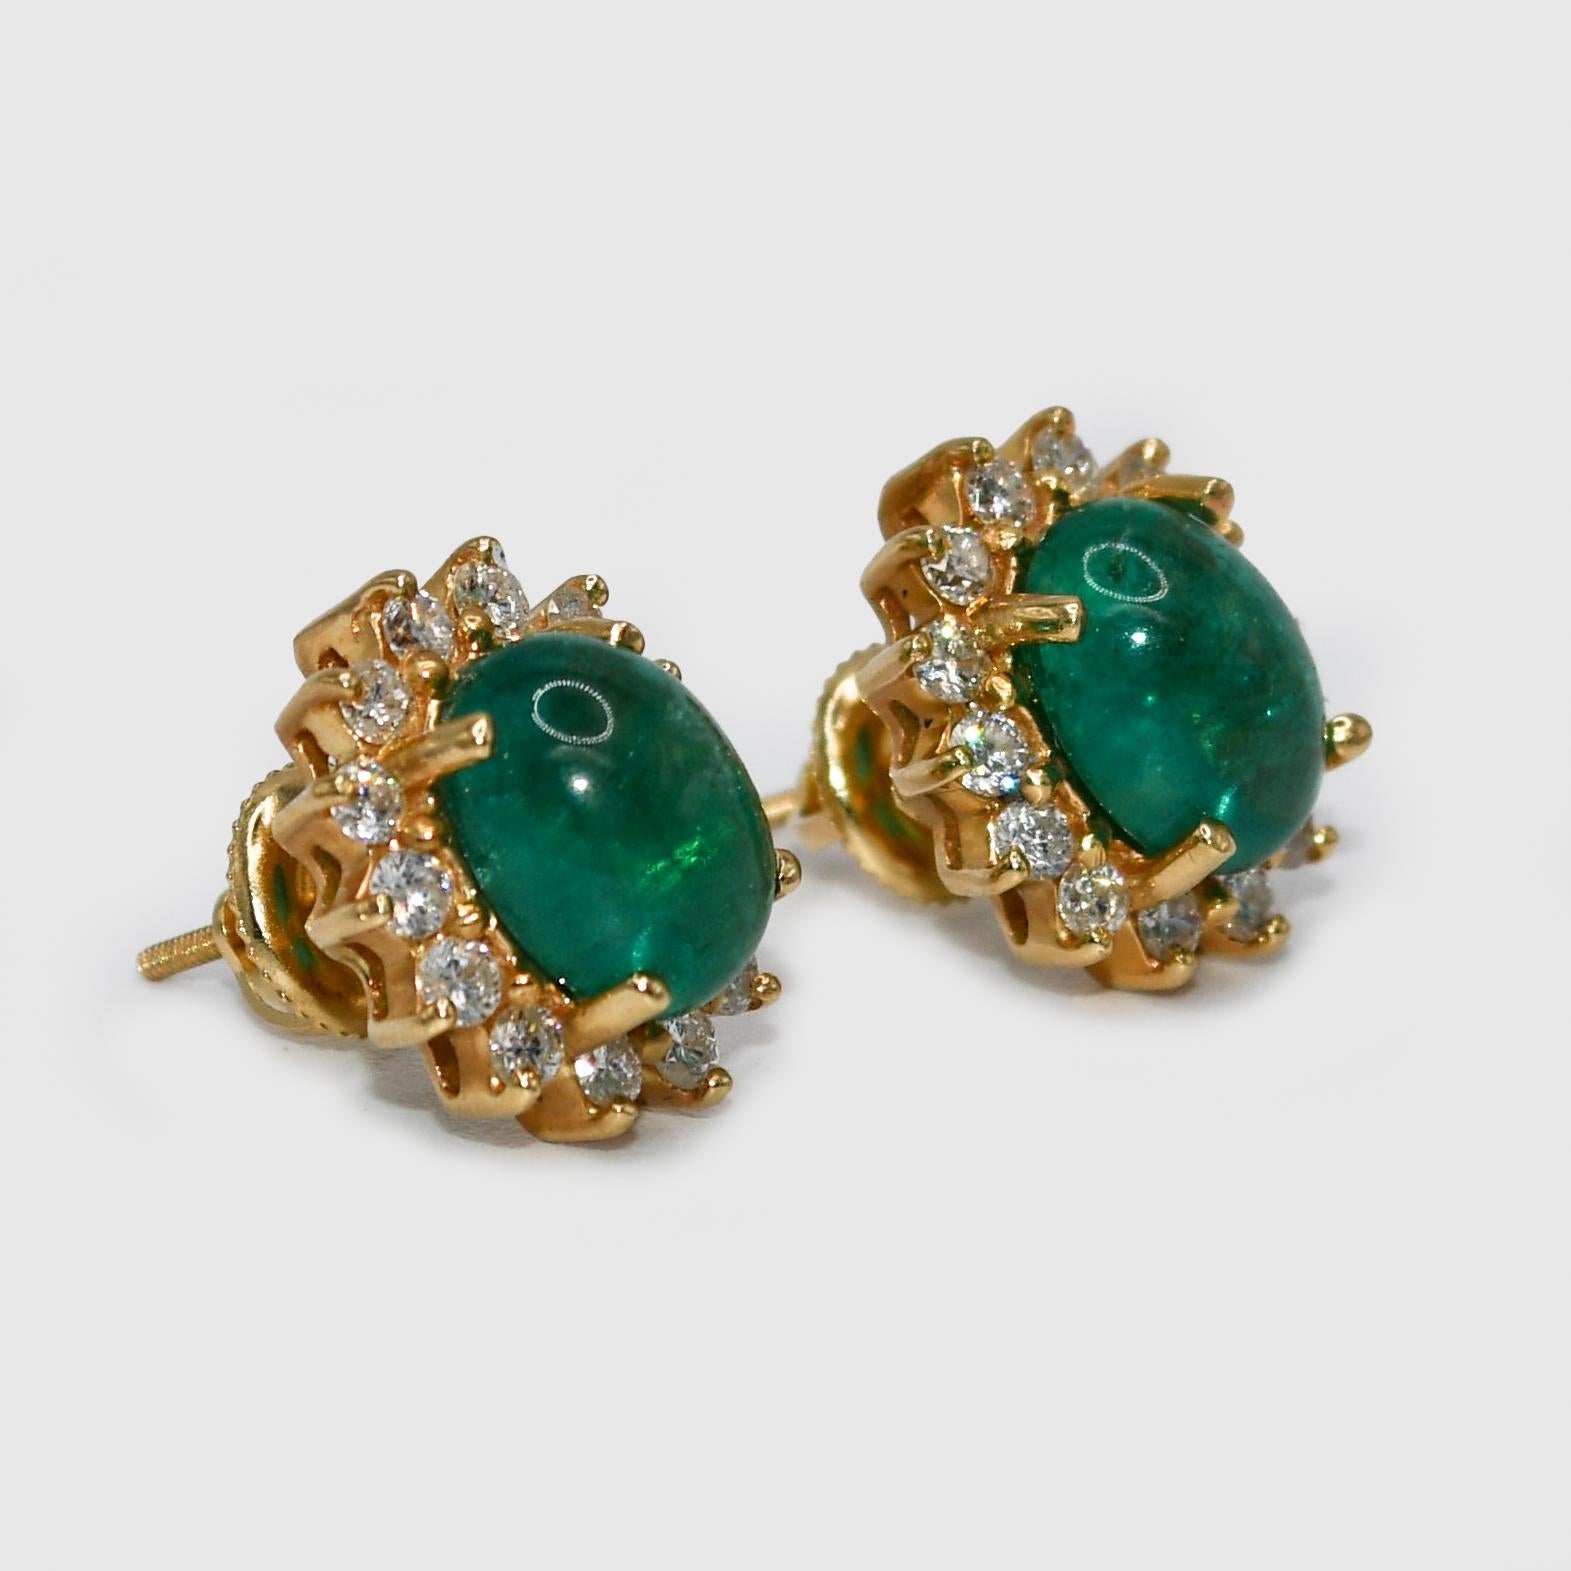 14K Yellow Gold Cabochon Emerald & Diamond Earrings 4.8g For Sale 1